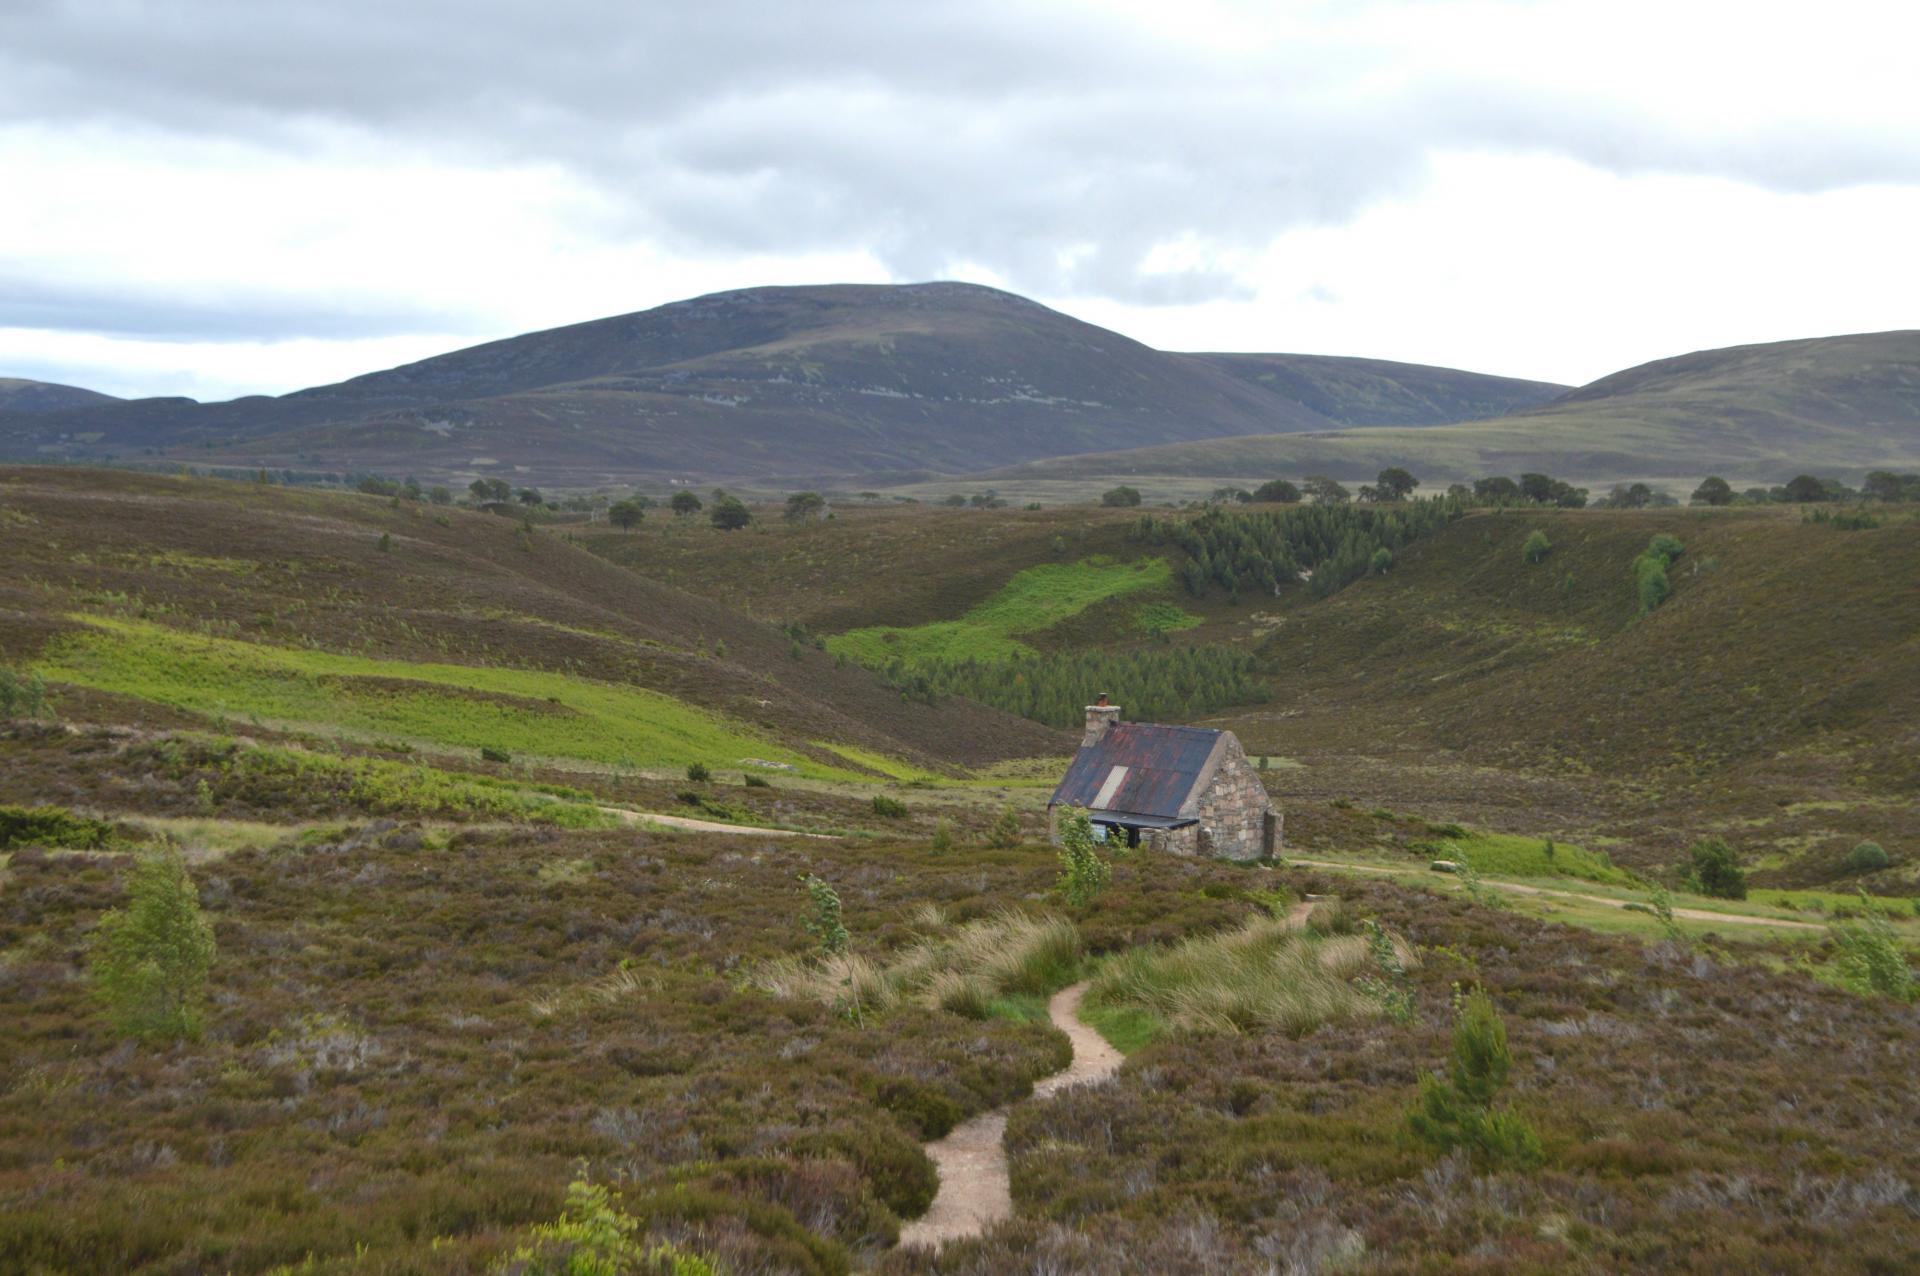 Scottish bothy walk - Ryvoan perfect beginner's bothy in the Highlands